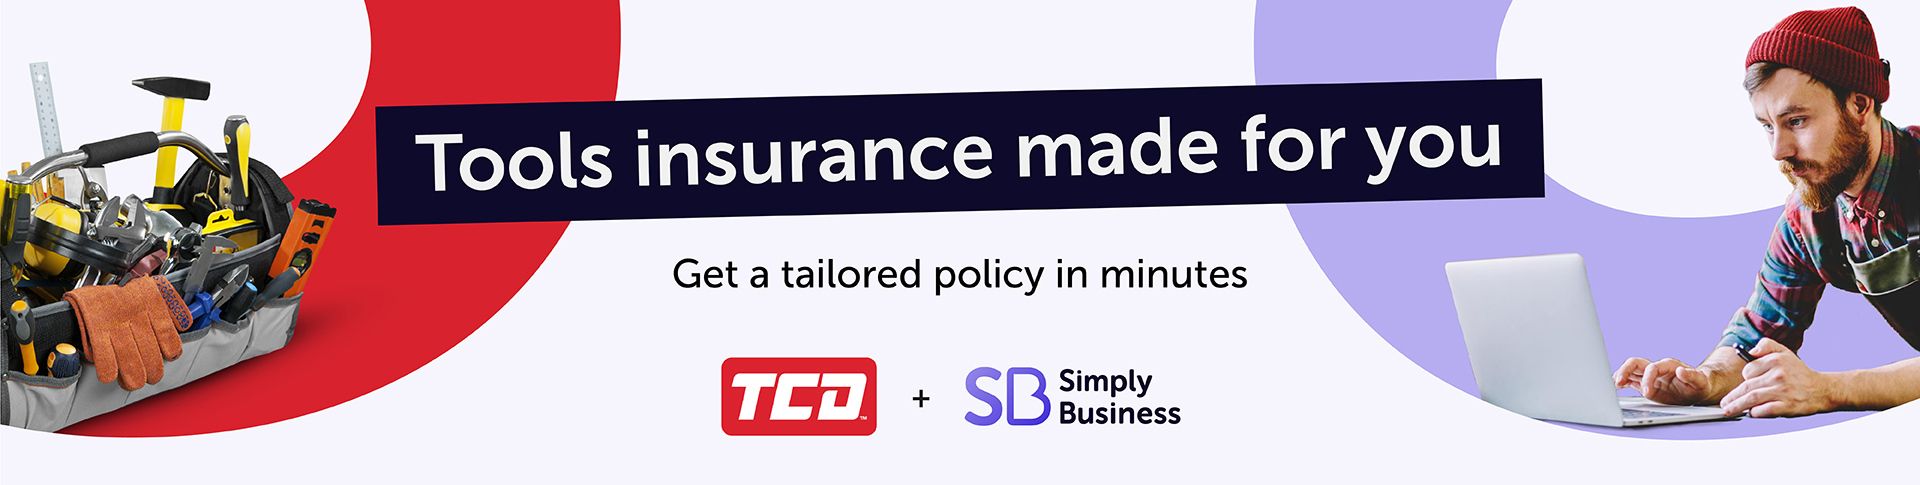 Tools Insurance Made for You